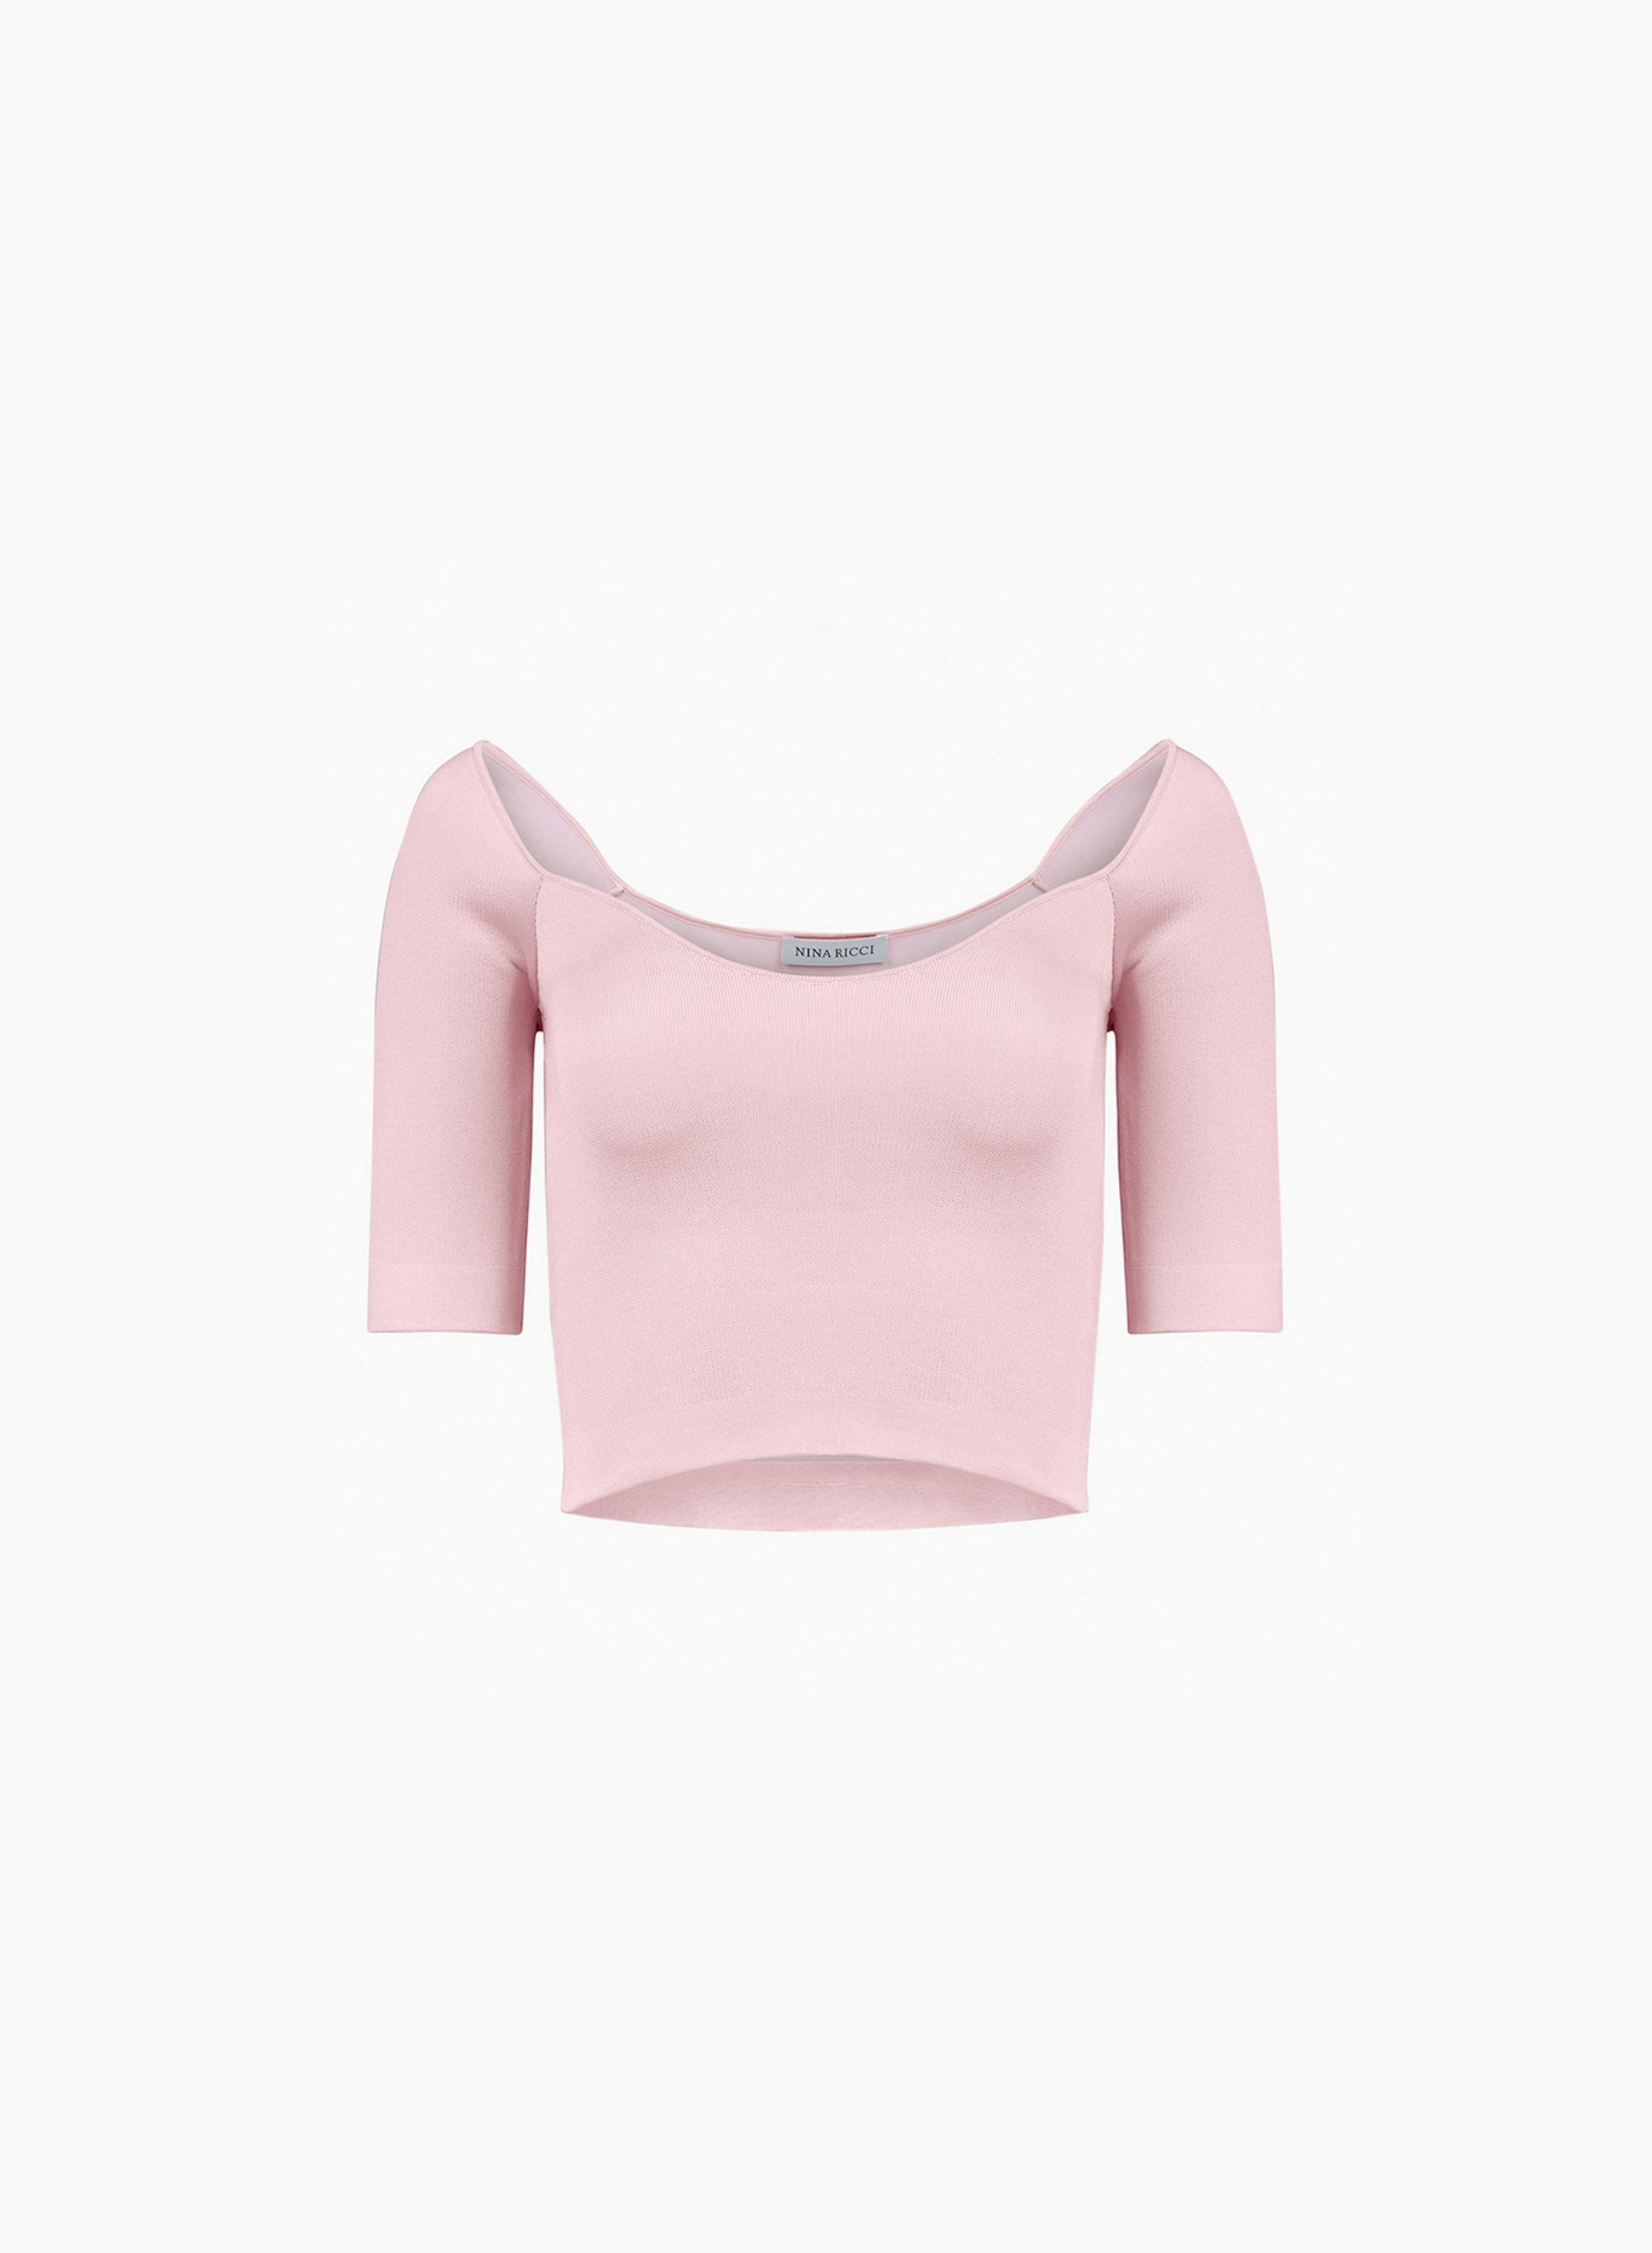 Heart neckline cropped top in pink - Nina Ricci